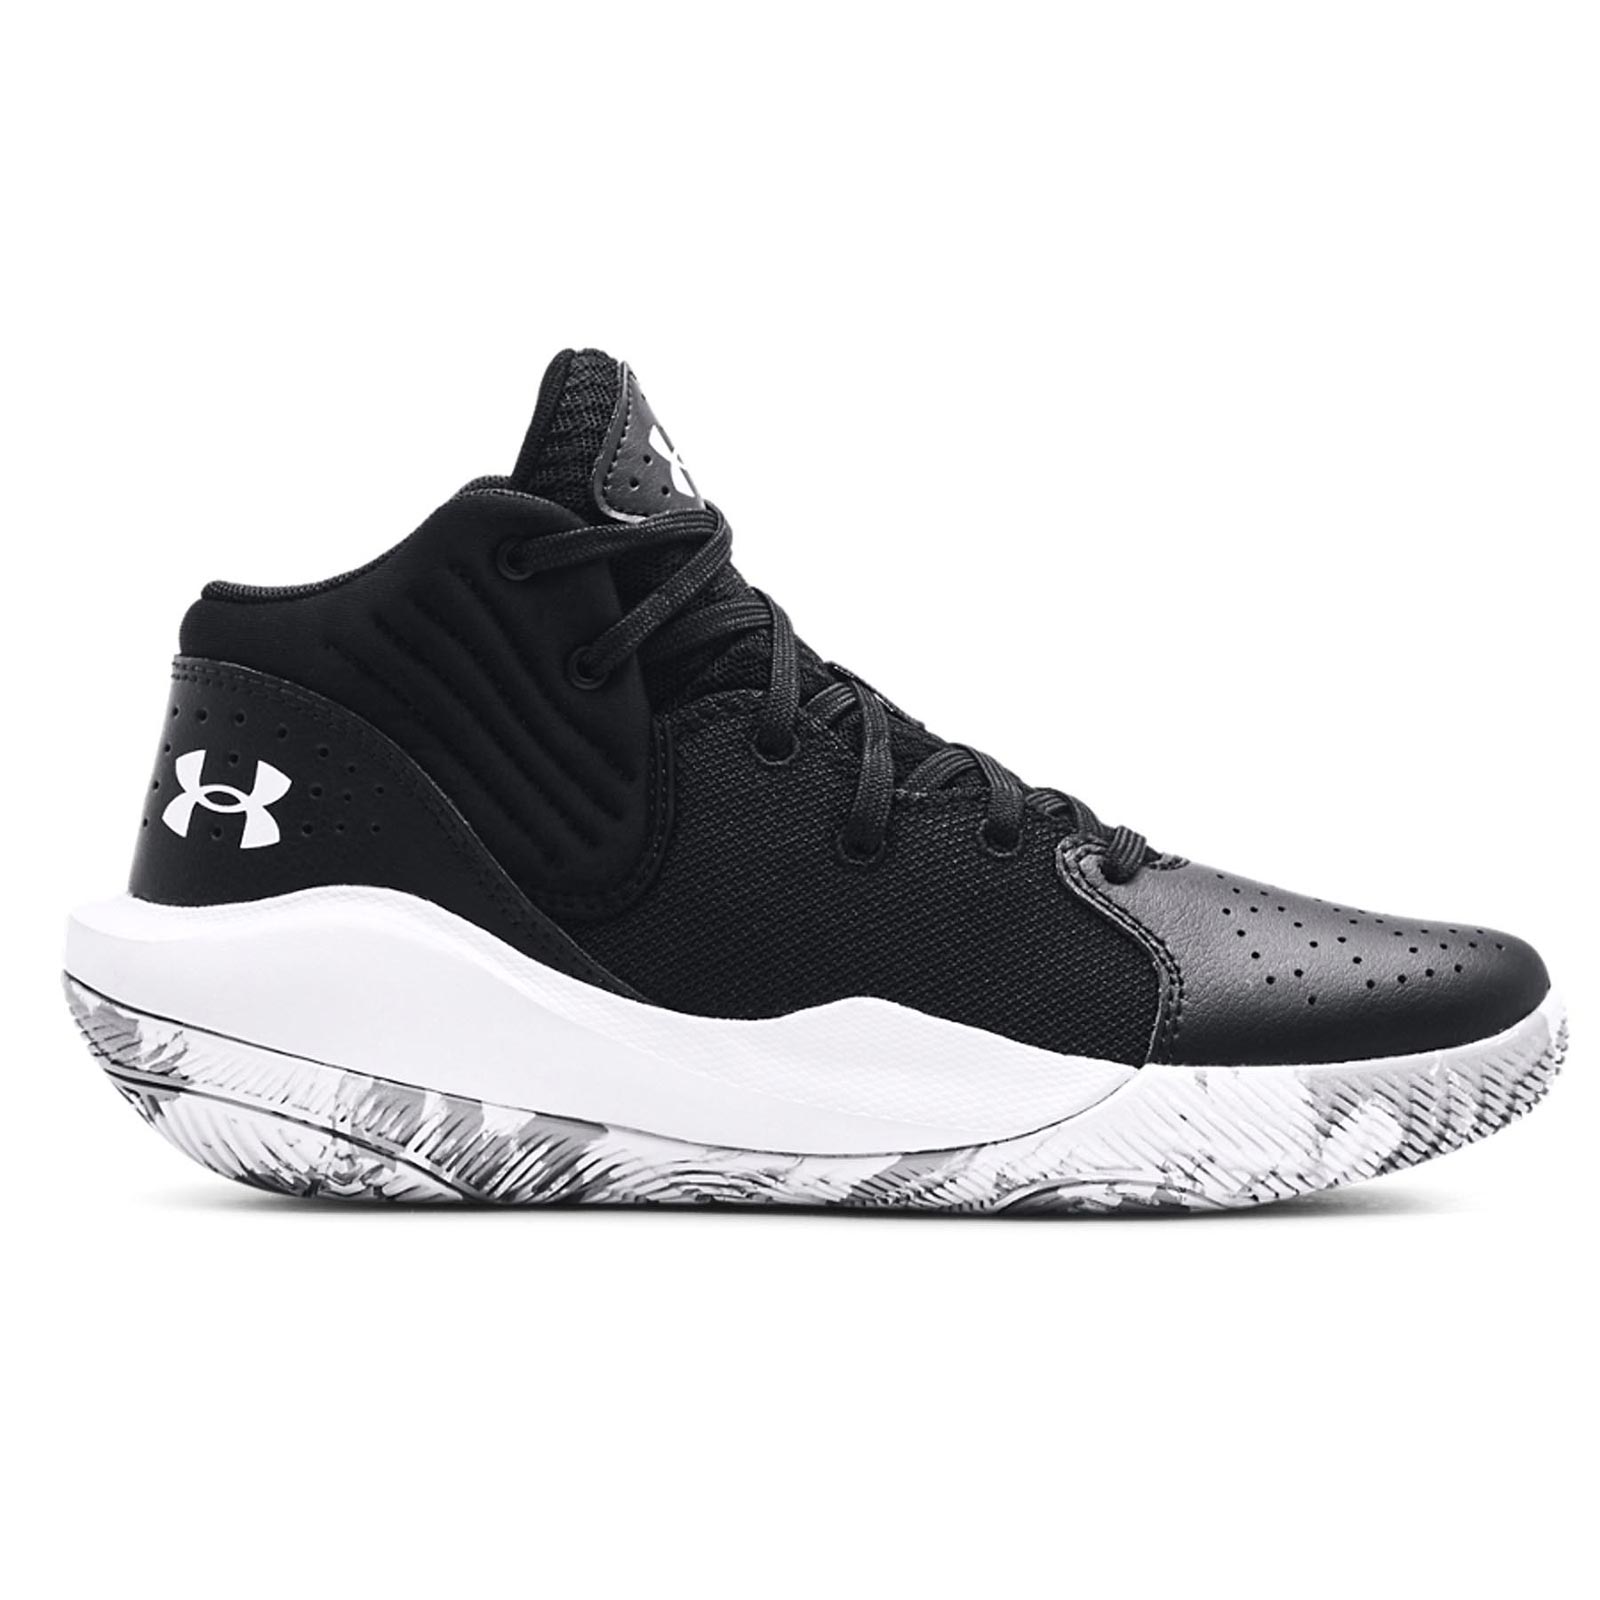 UNDER ARMOUR JET '21 KIDS BASKETBALL SHOES